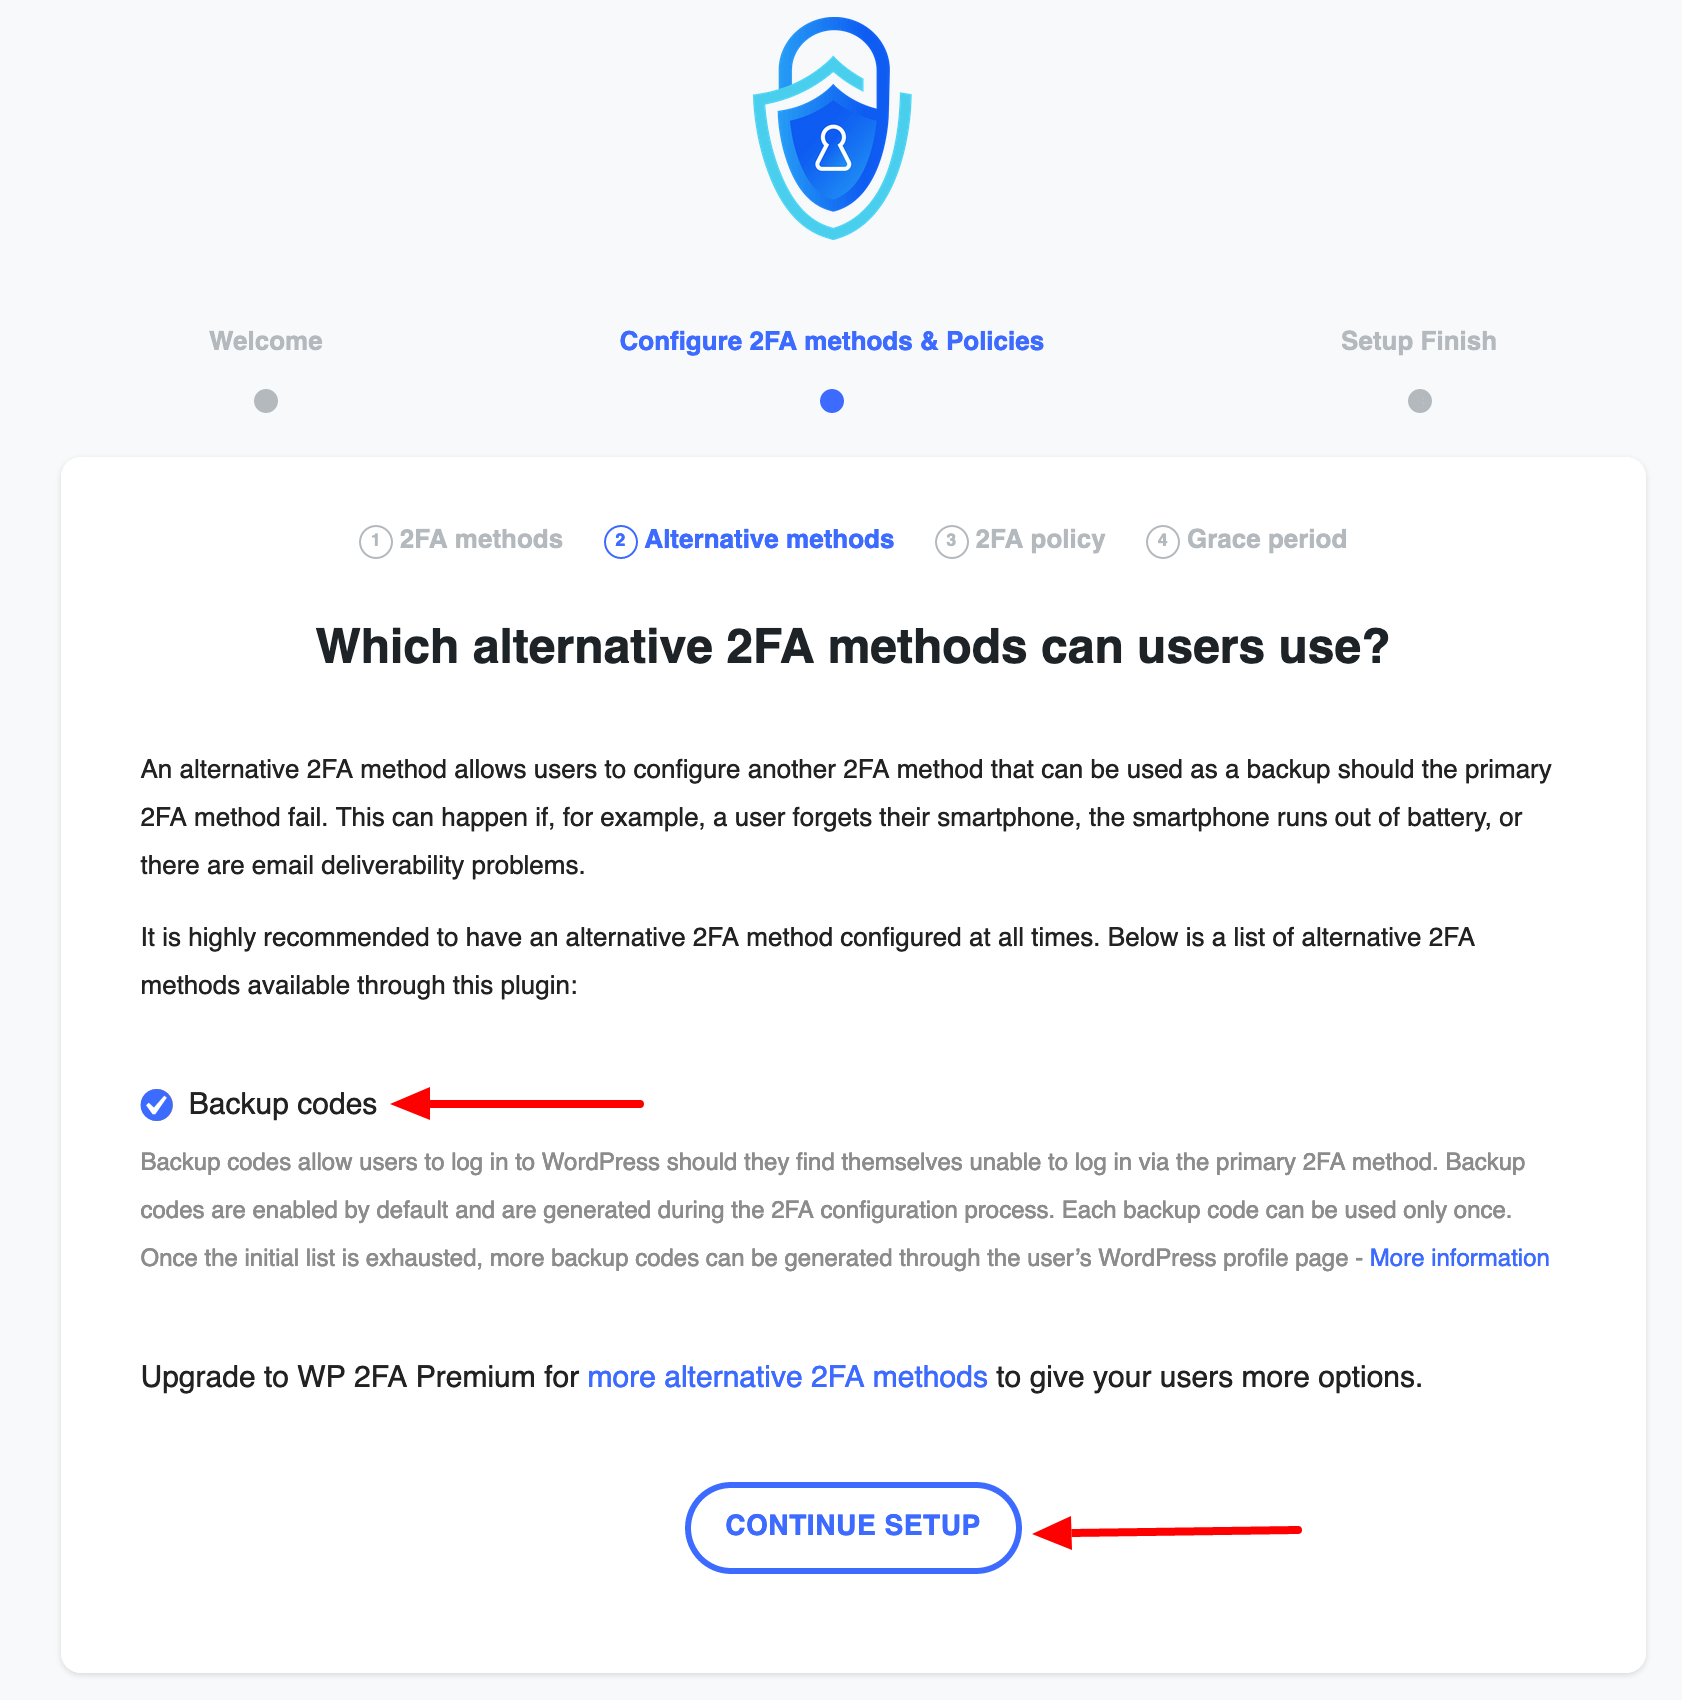 WP 2FA offers a single-use backup code in case dual authentication fails for users.